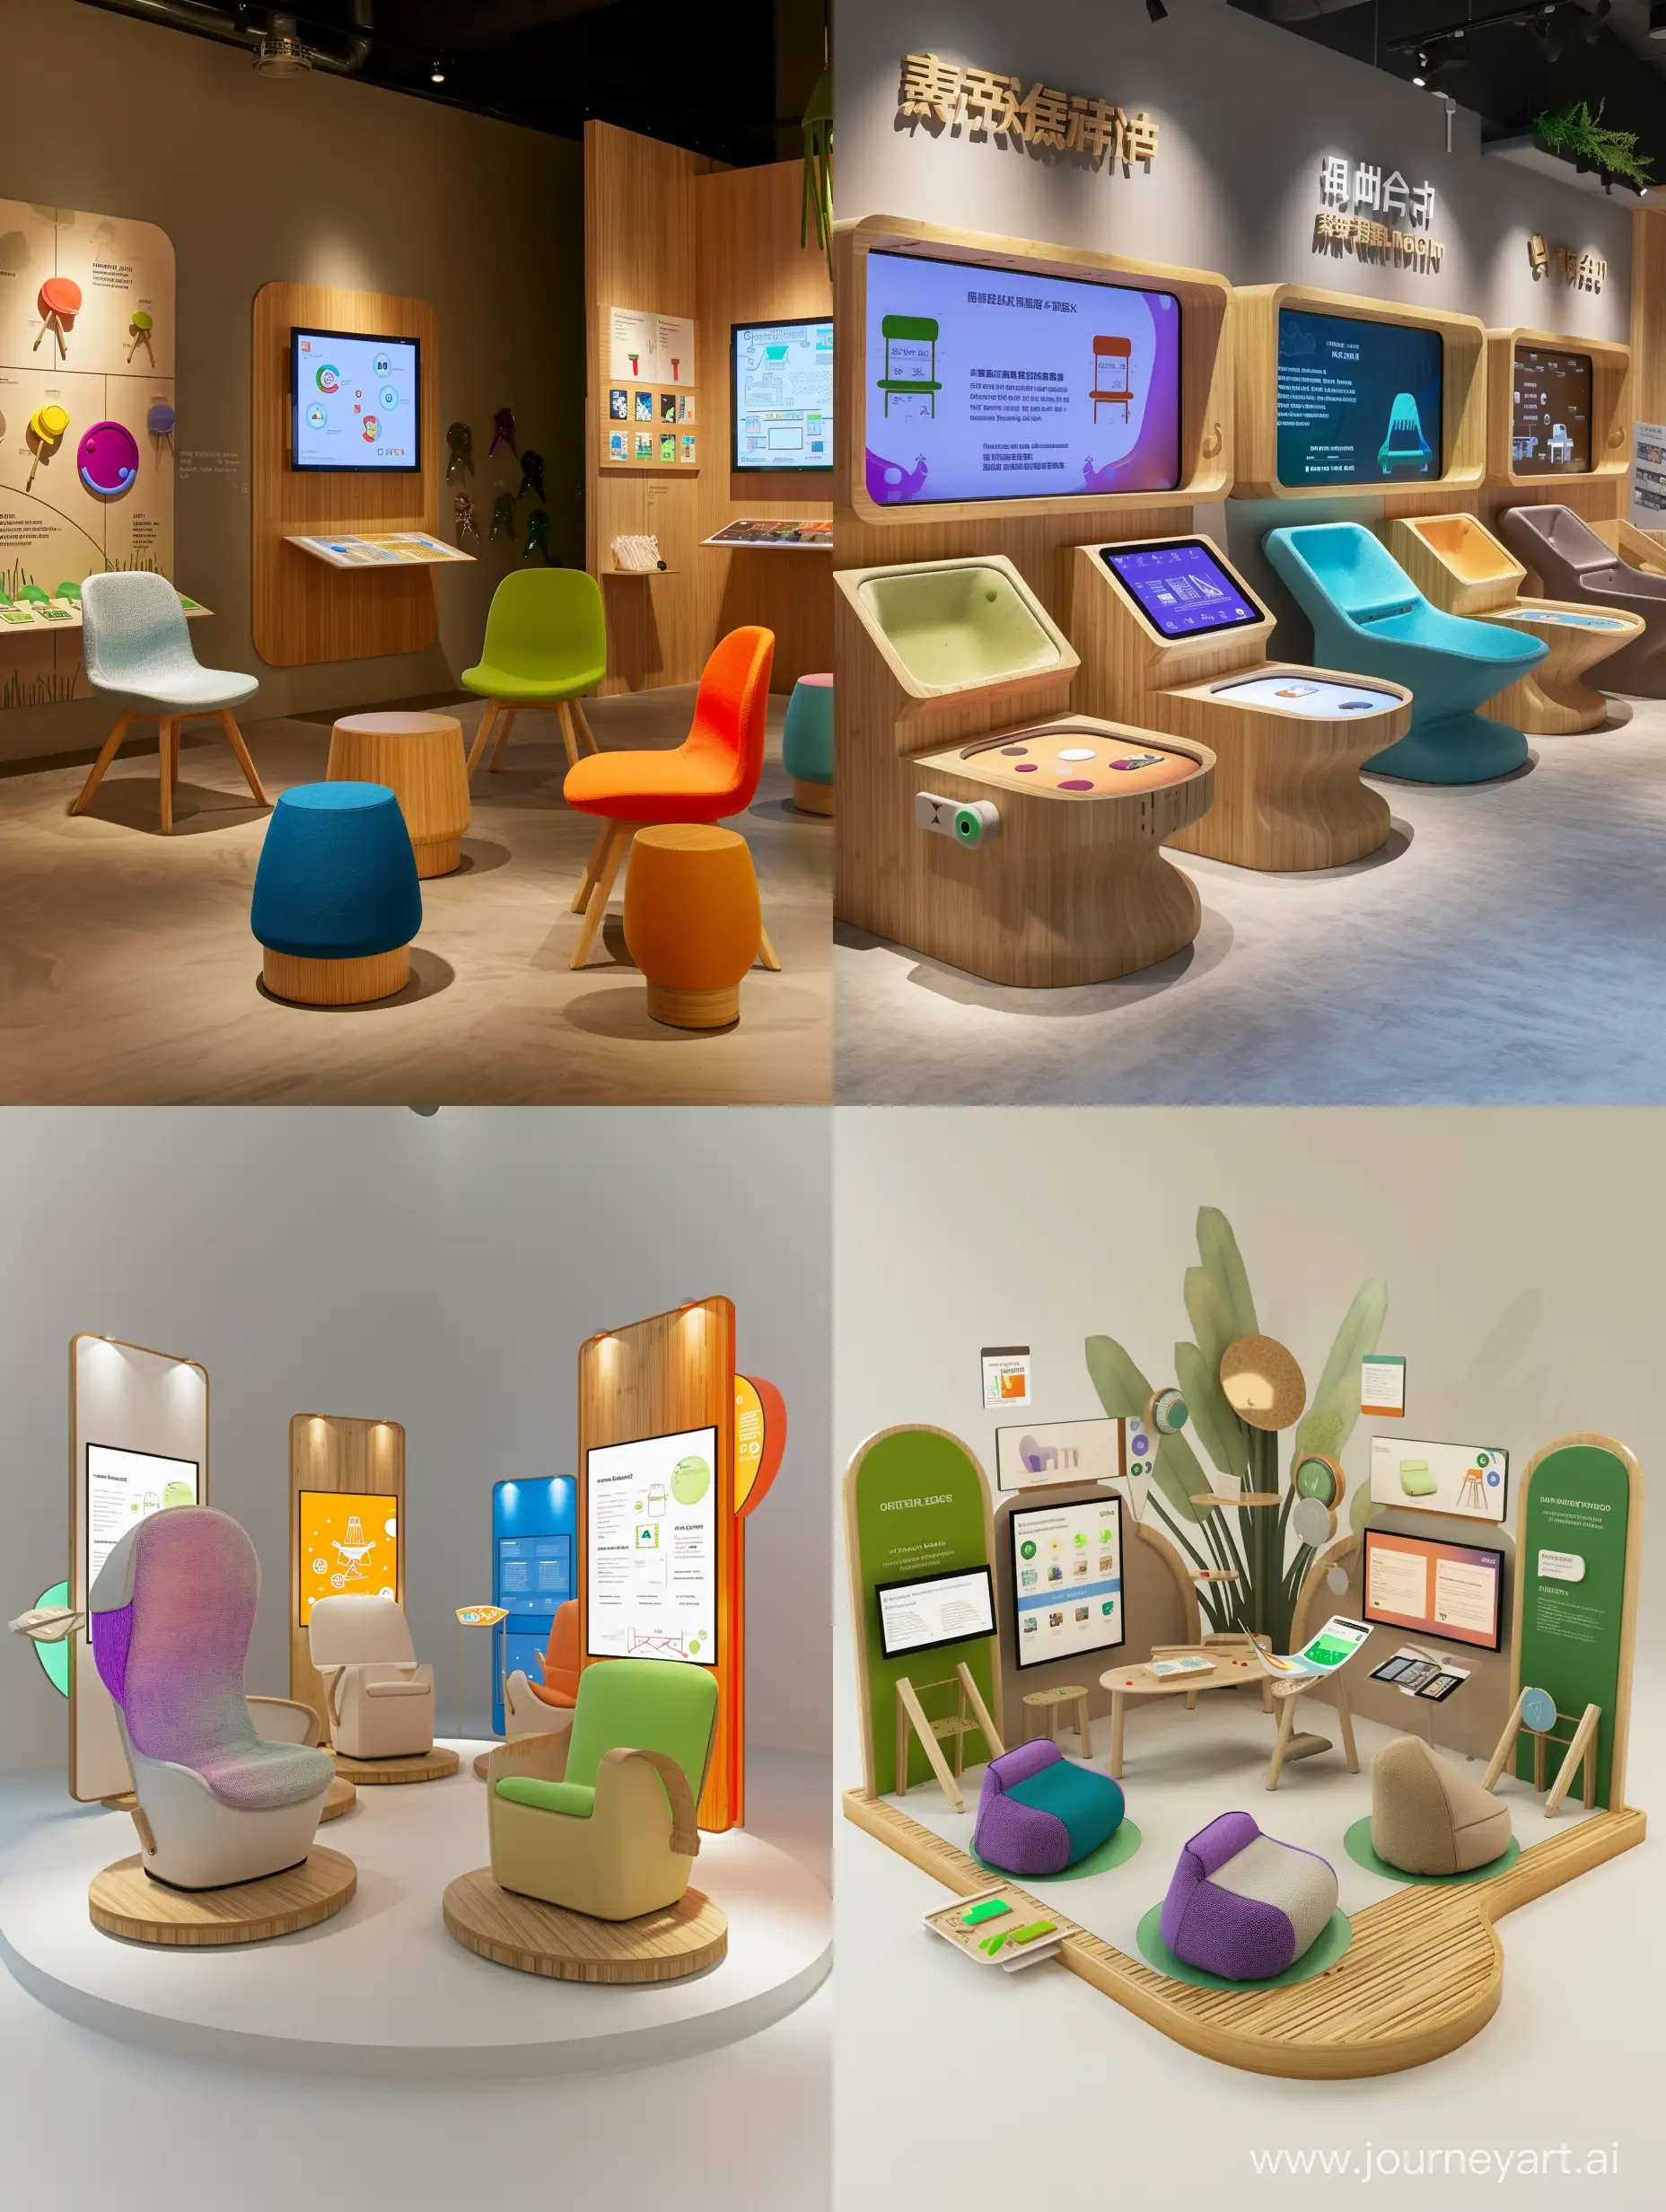 imagine an image of  Interactive Zone (Approx. 6.75 sqm)of kids chair showroom:
Color and Material: Neutral backdrop with interactive elements in vibrant colors; touch-friendly surfaces like bamboo, fabric, and recycled plastics.
Items and Elements: Interactive digital screens; material samples for tactile exploration; small, interactive installations related to chair design.
Graphic Features: Interactive digital content, possibly augmented reality experiences; informational graphics about sustainability practices.
Lighting: Bright, clear lighting for screen visibility; accent lighting on material samples and installations.realistic style